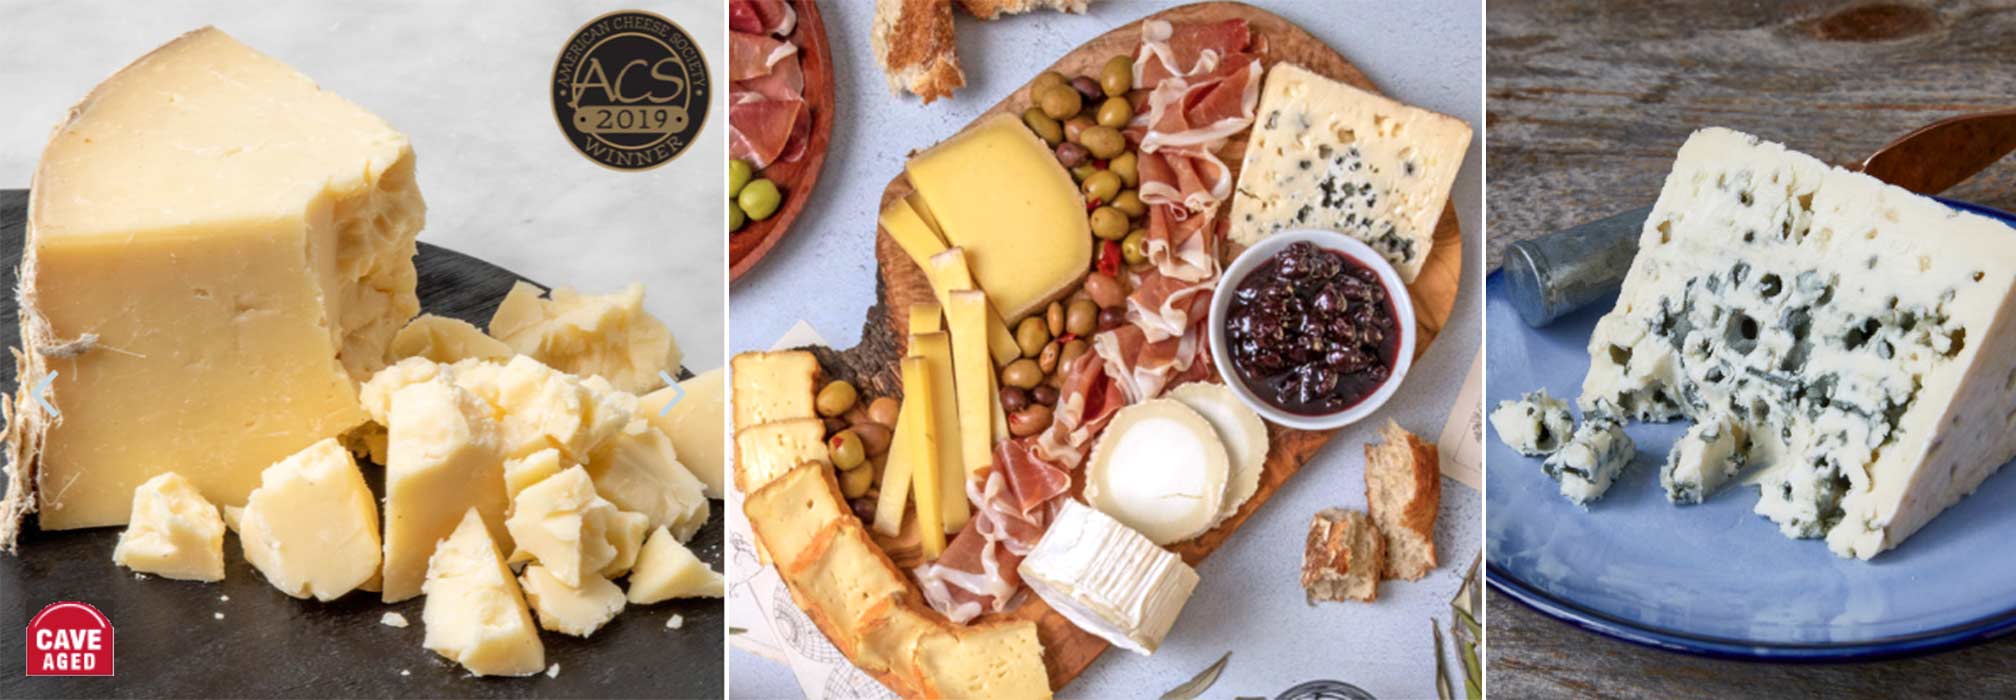 Cheeses and chacuterie available at Murray's Cheese in New York